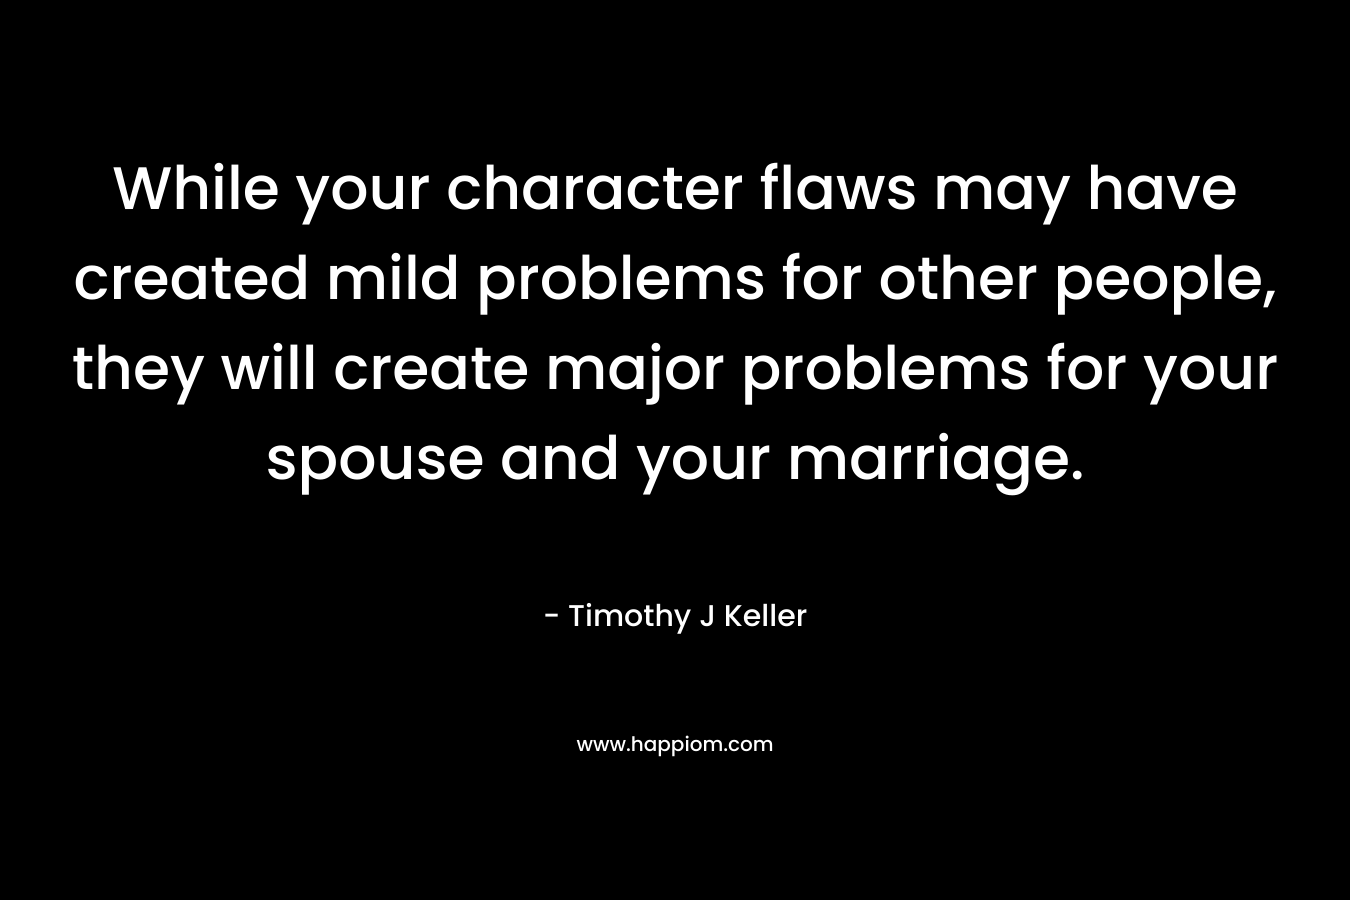 While your character flaws may have created mild problems for other people, they will create major problems for your spouse and your marriage. – Timothy J Keller